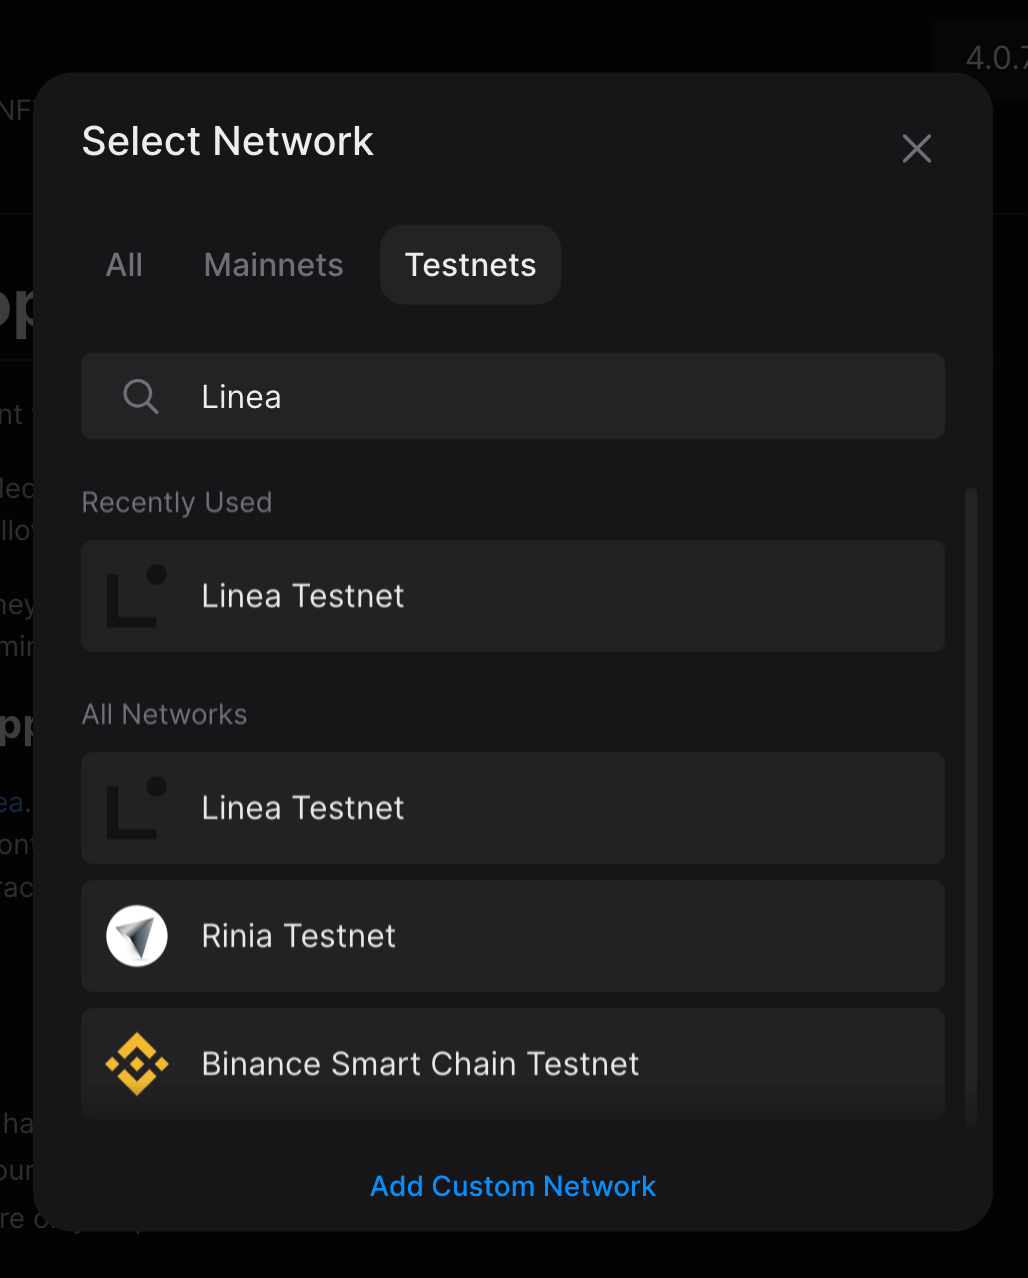 Search for "Linea" and select Linea Testnet